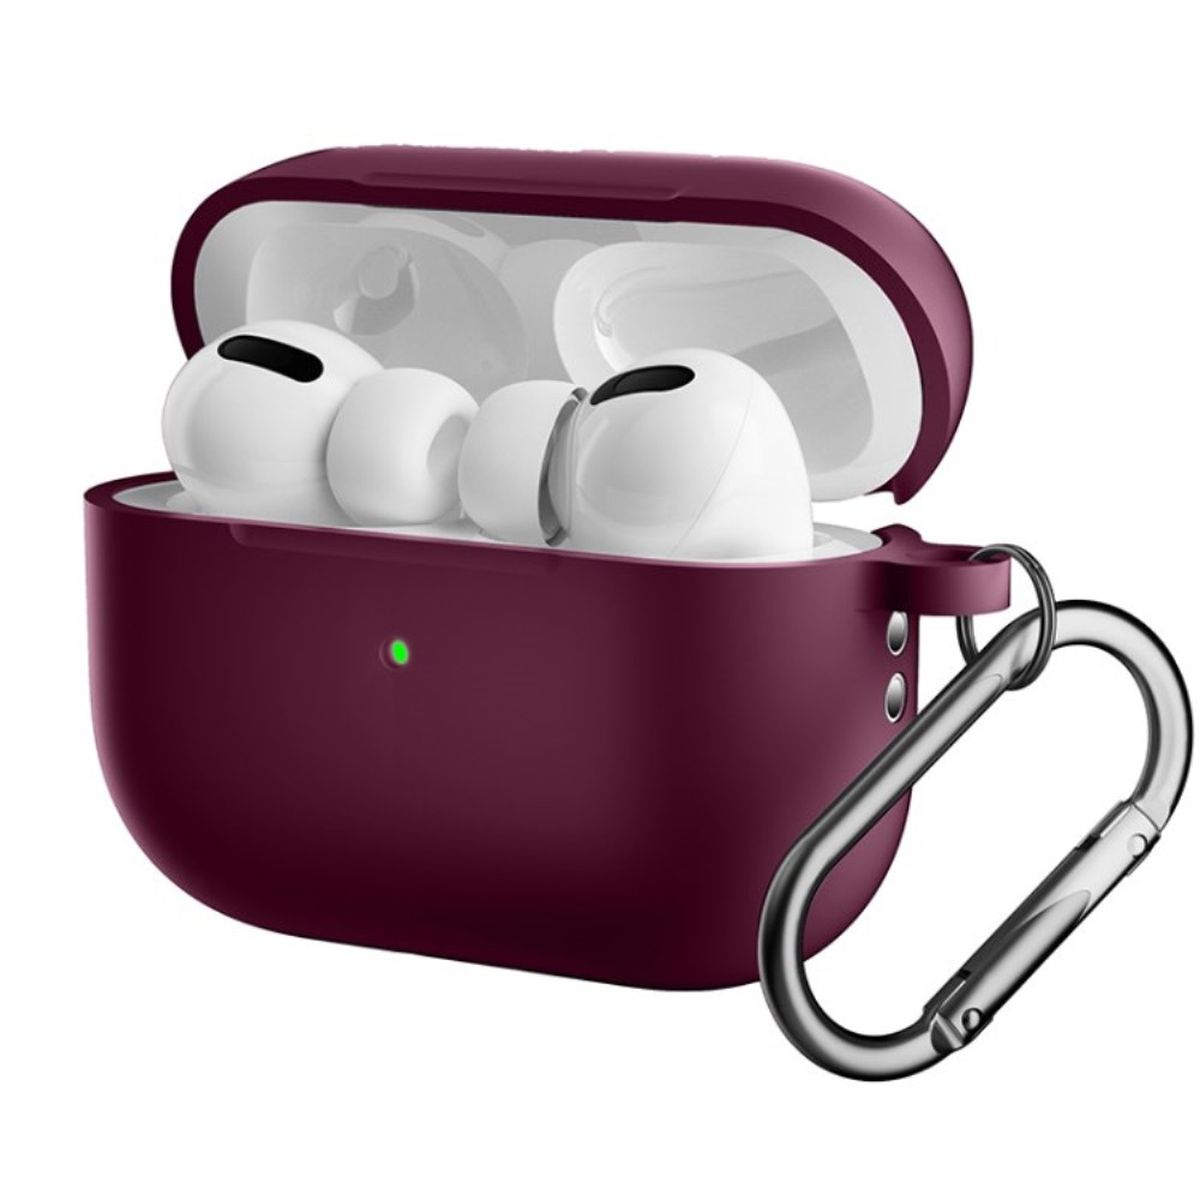 COVERKINGZ Silikoncover Apple weinrot, 2 Ladecase Pro x für Airpods